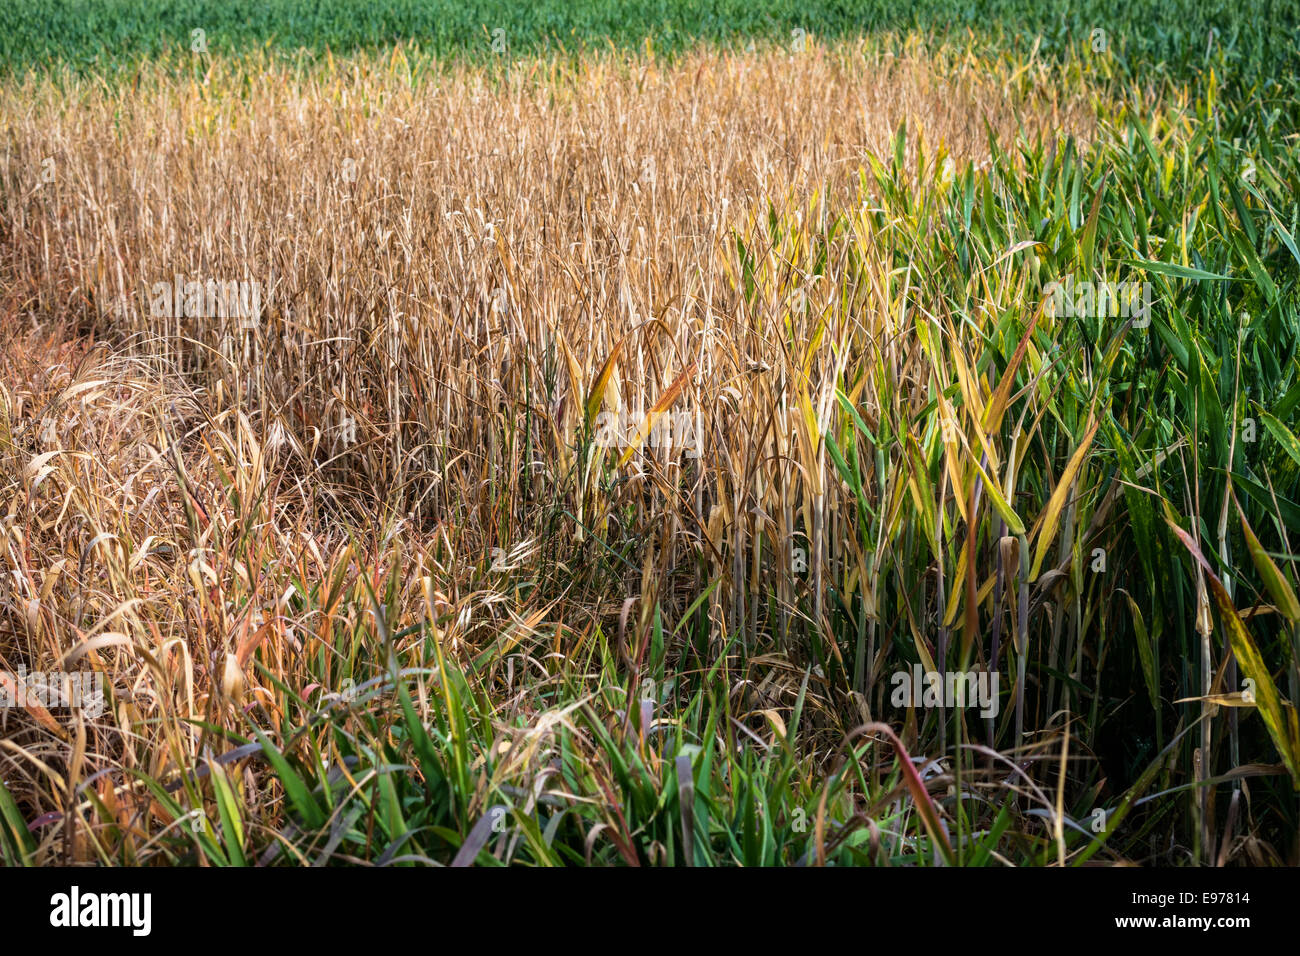 Yellowing of a whet crop caused by contamination. Stock Photo